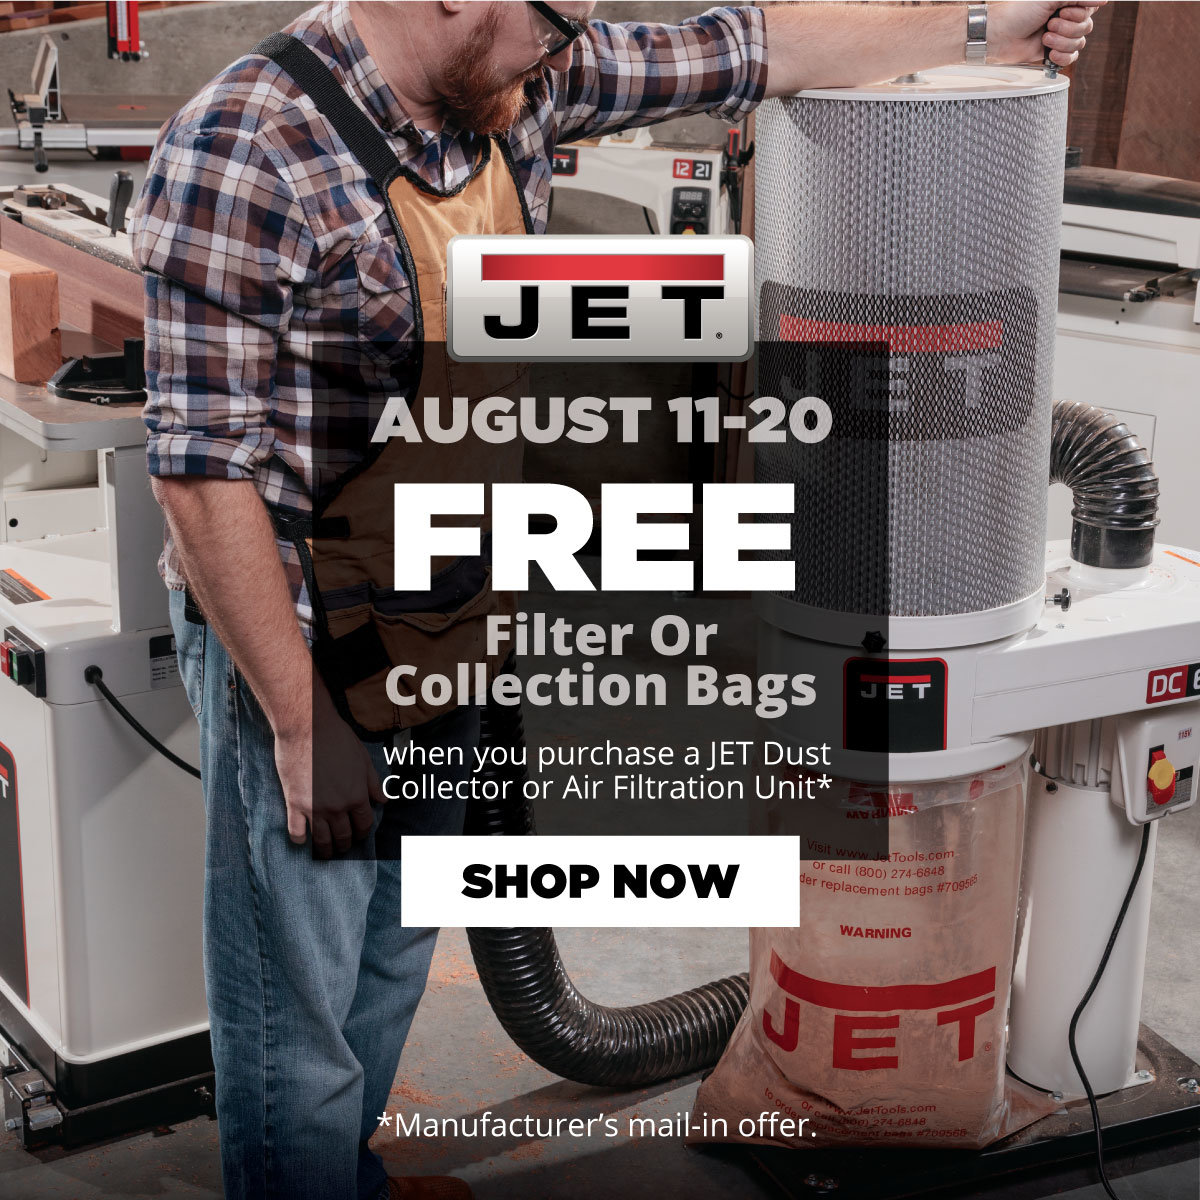 August 11-20 - Free Filter or Collection Bags When You Purchase a JET Dust Collector or Air Filtration Unit * Manufacturer's mail-in offer.